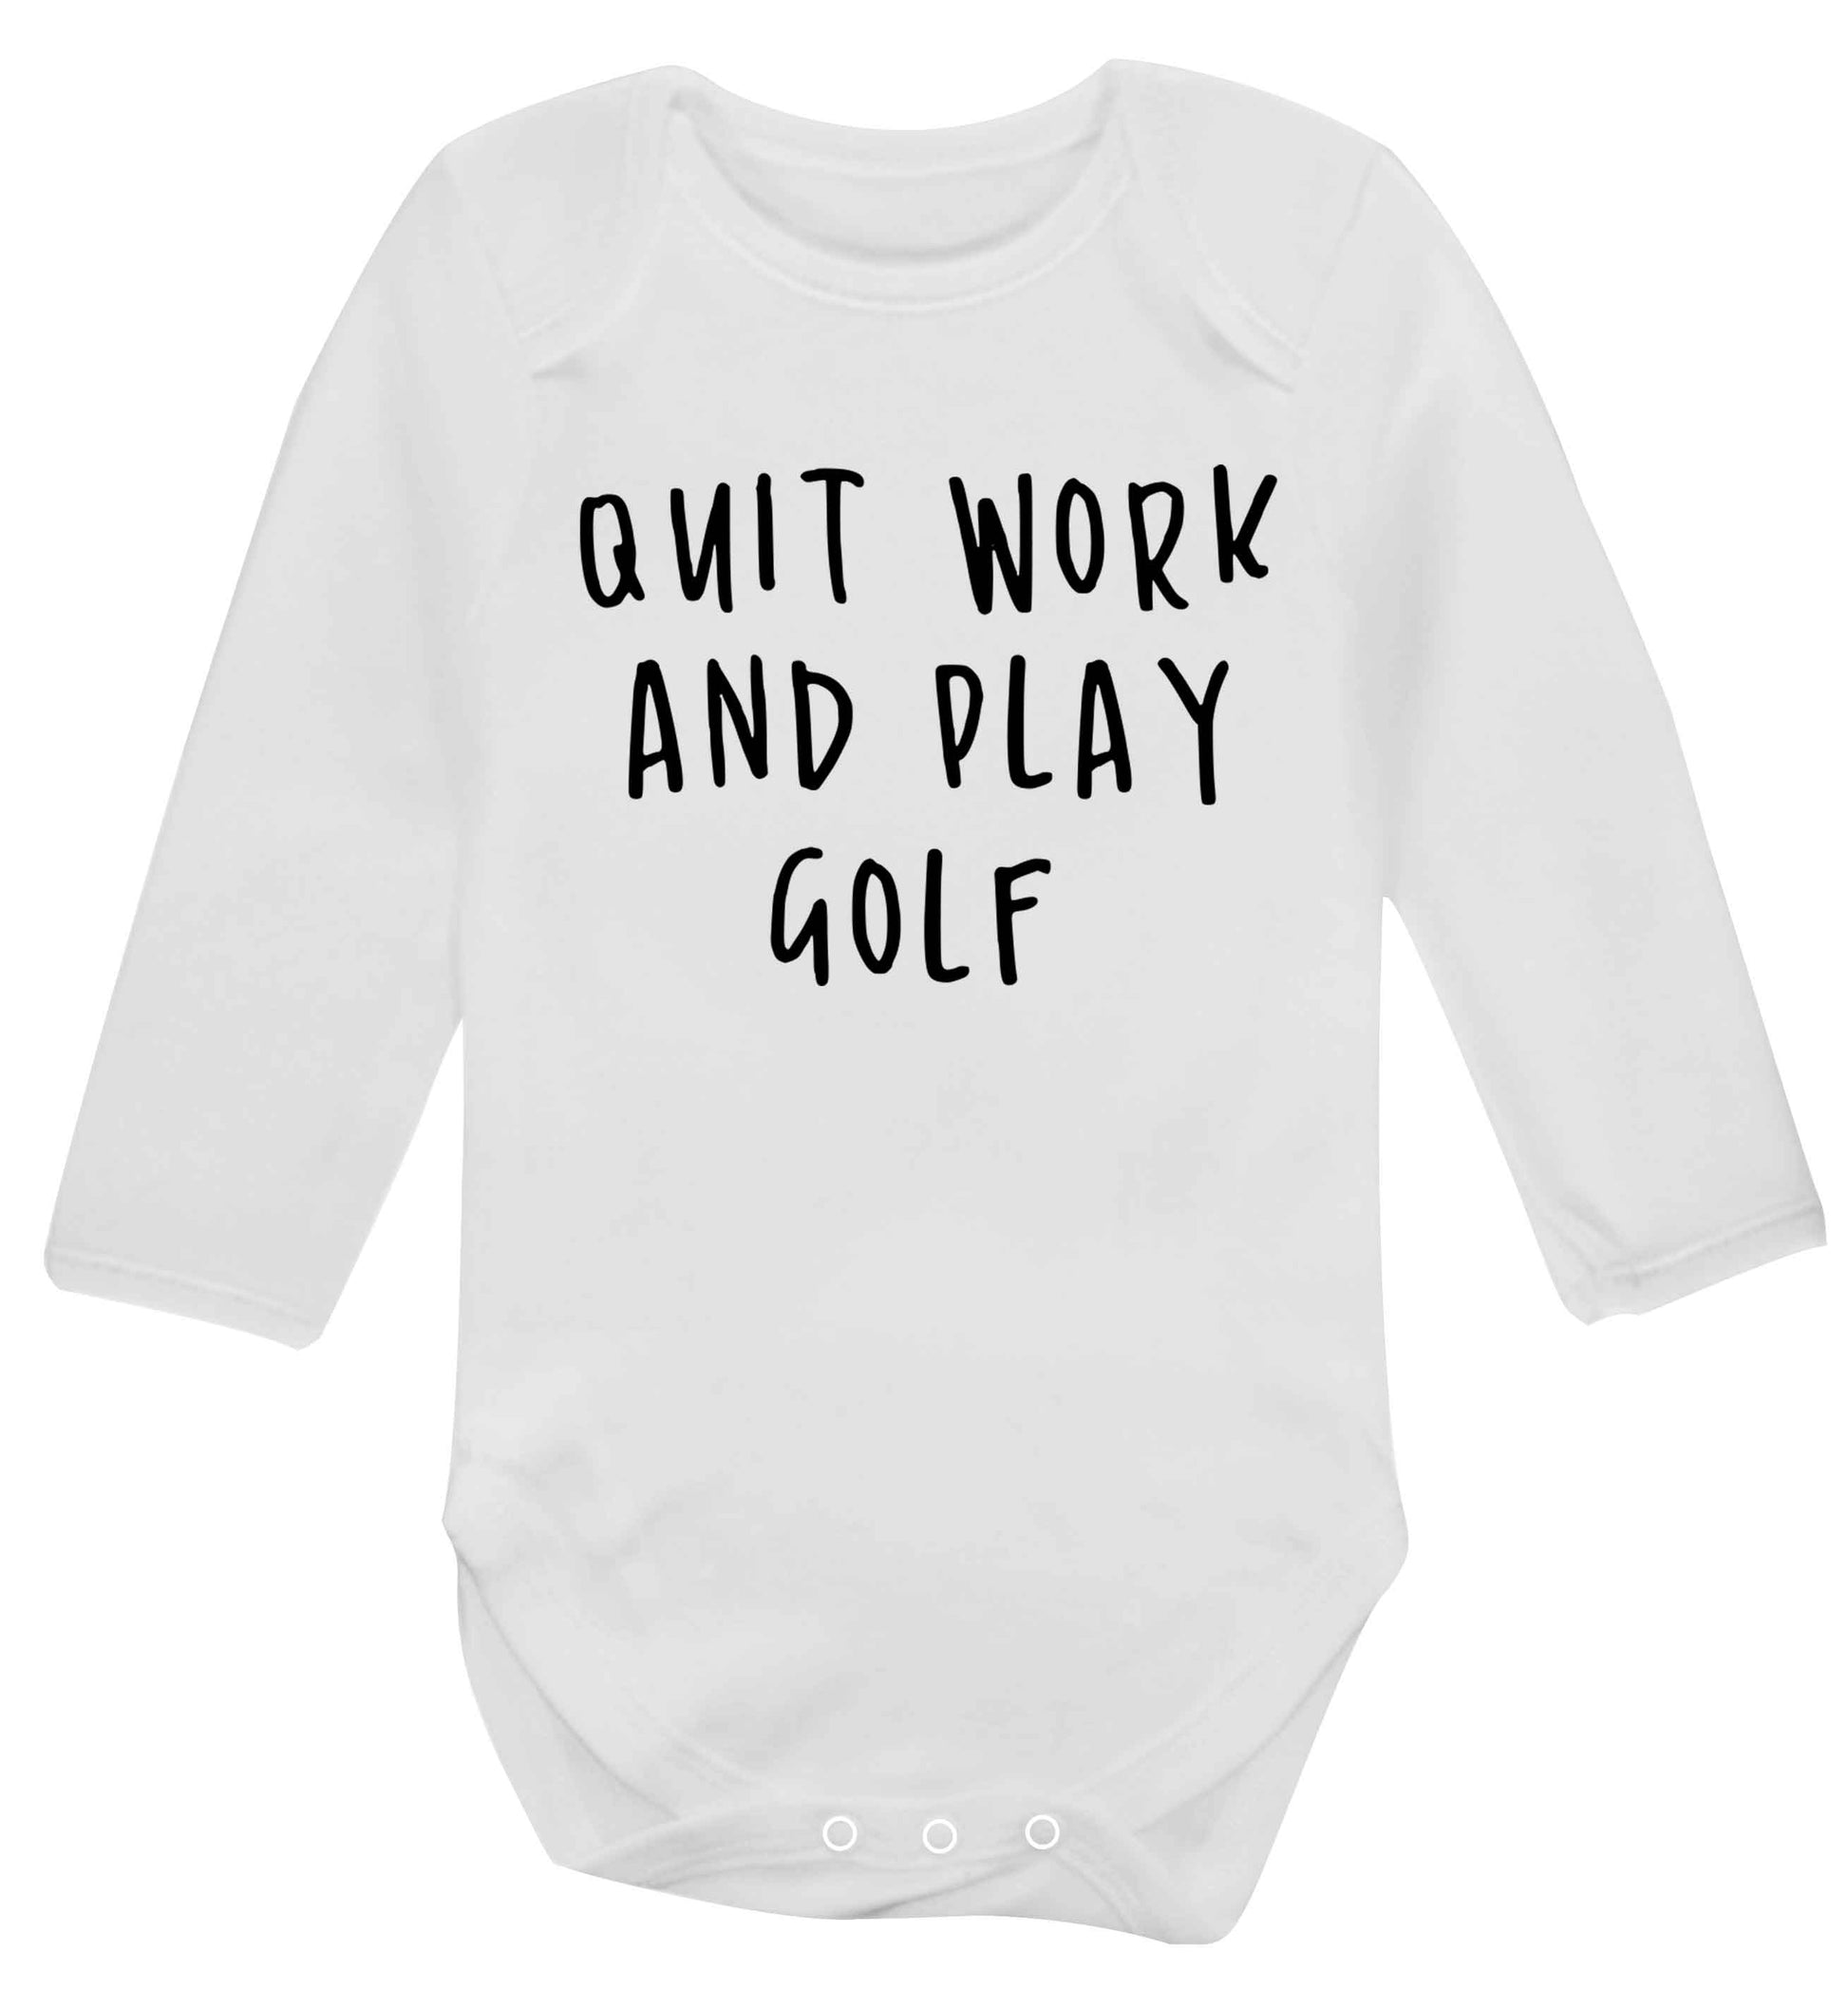 Quit work and play golf Baby Vest long sleeved white 6-12 months